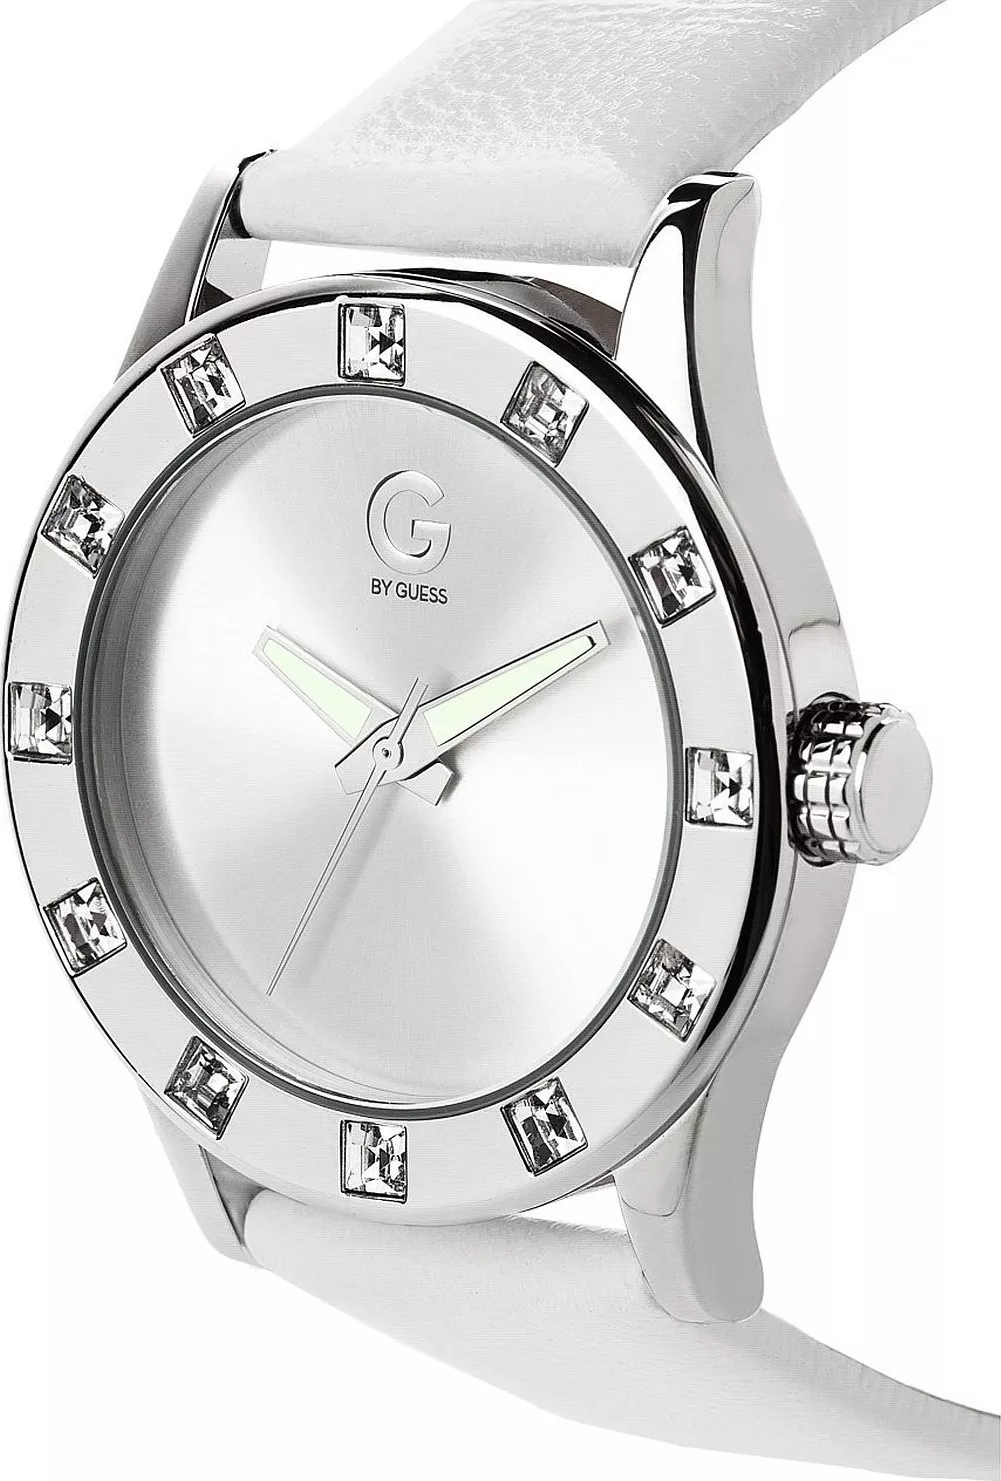 G by GUESS Women's White Silver-Tone Watch 40mm